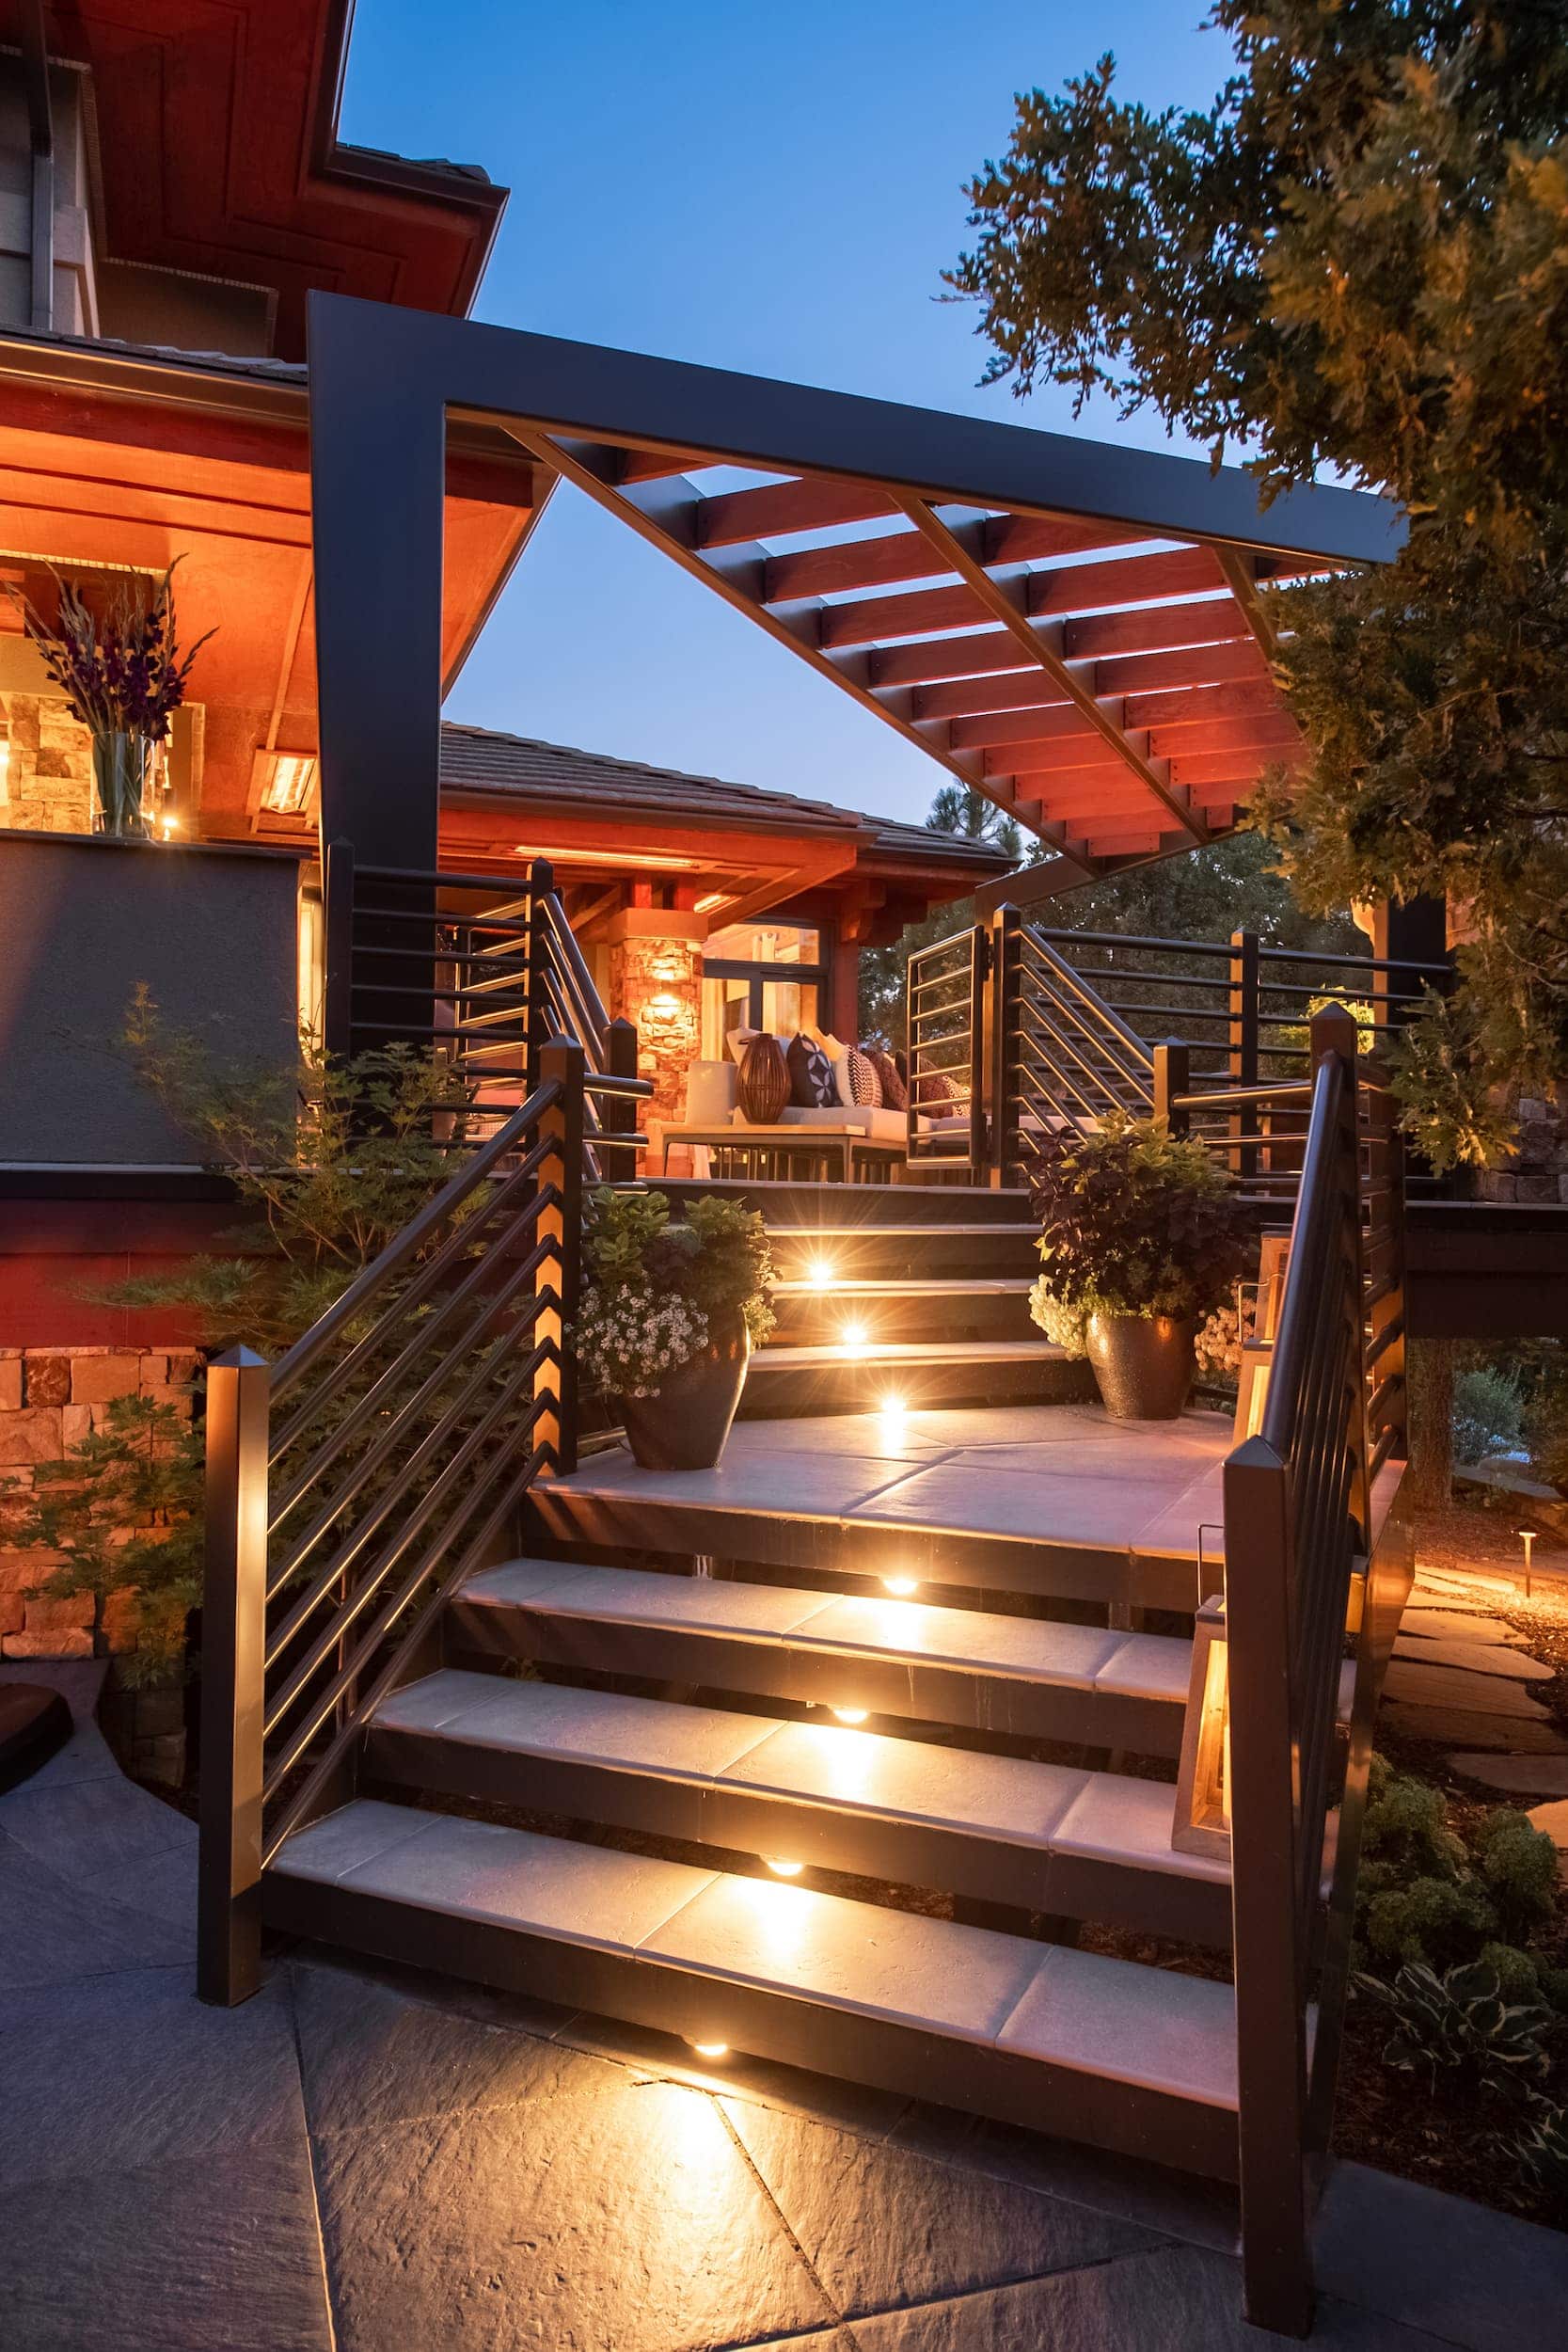 A modern outdoor staircase with lighting at dusk.